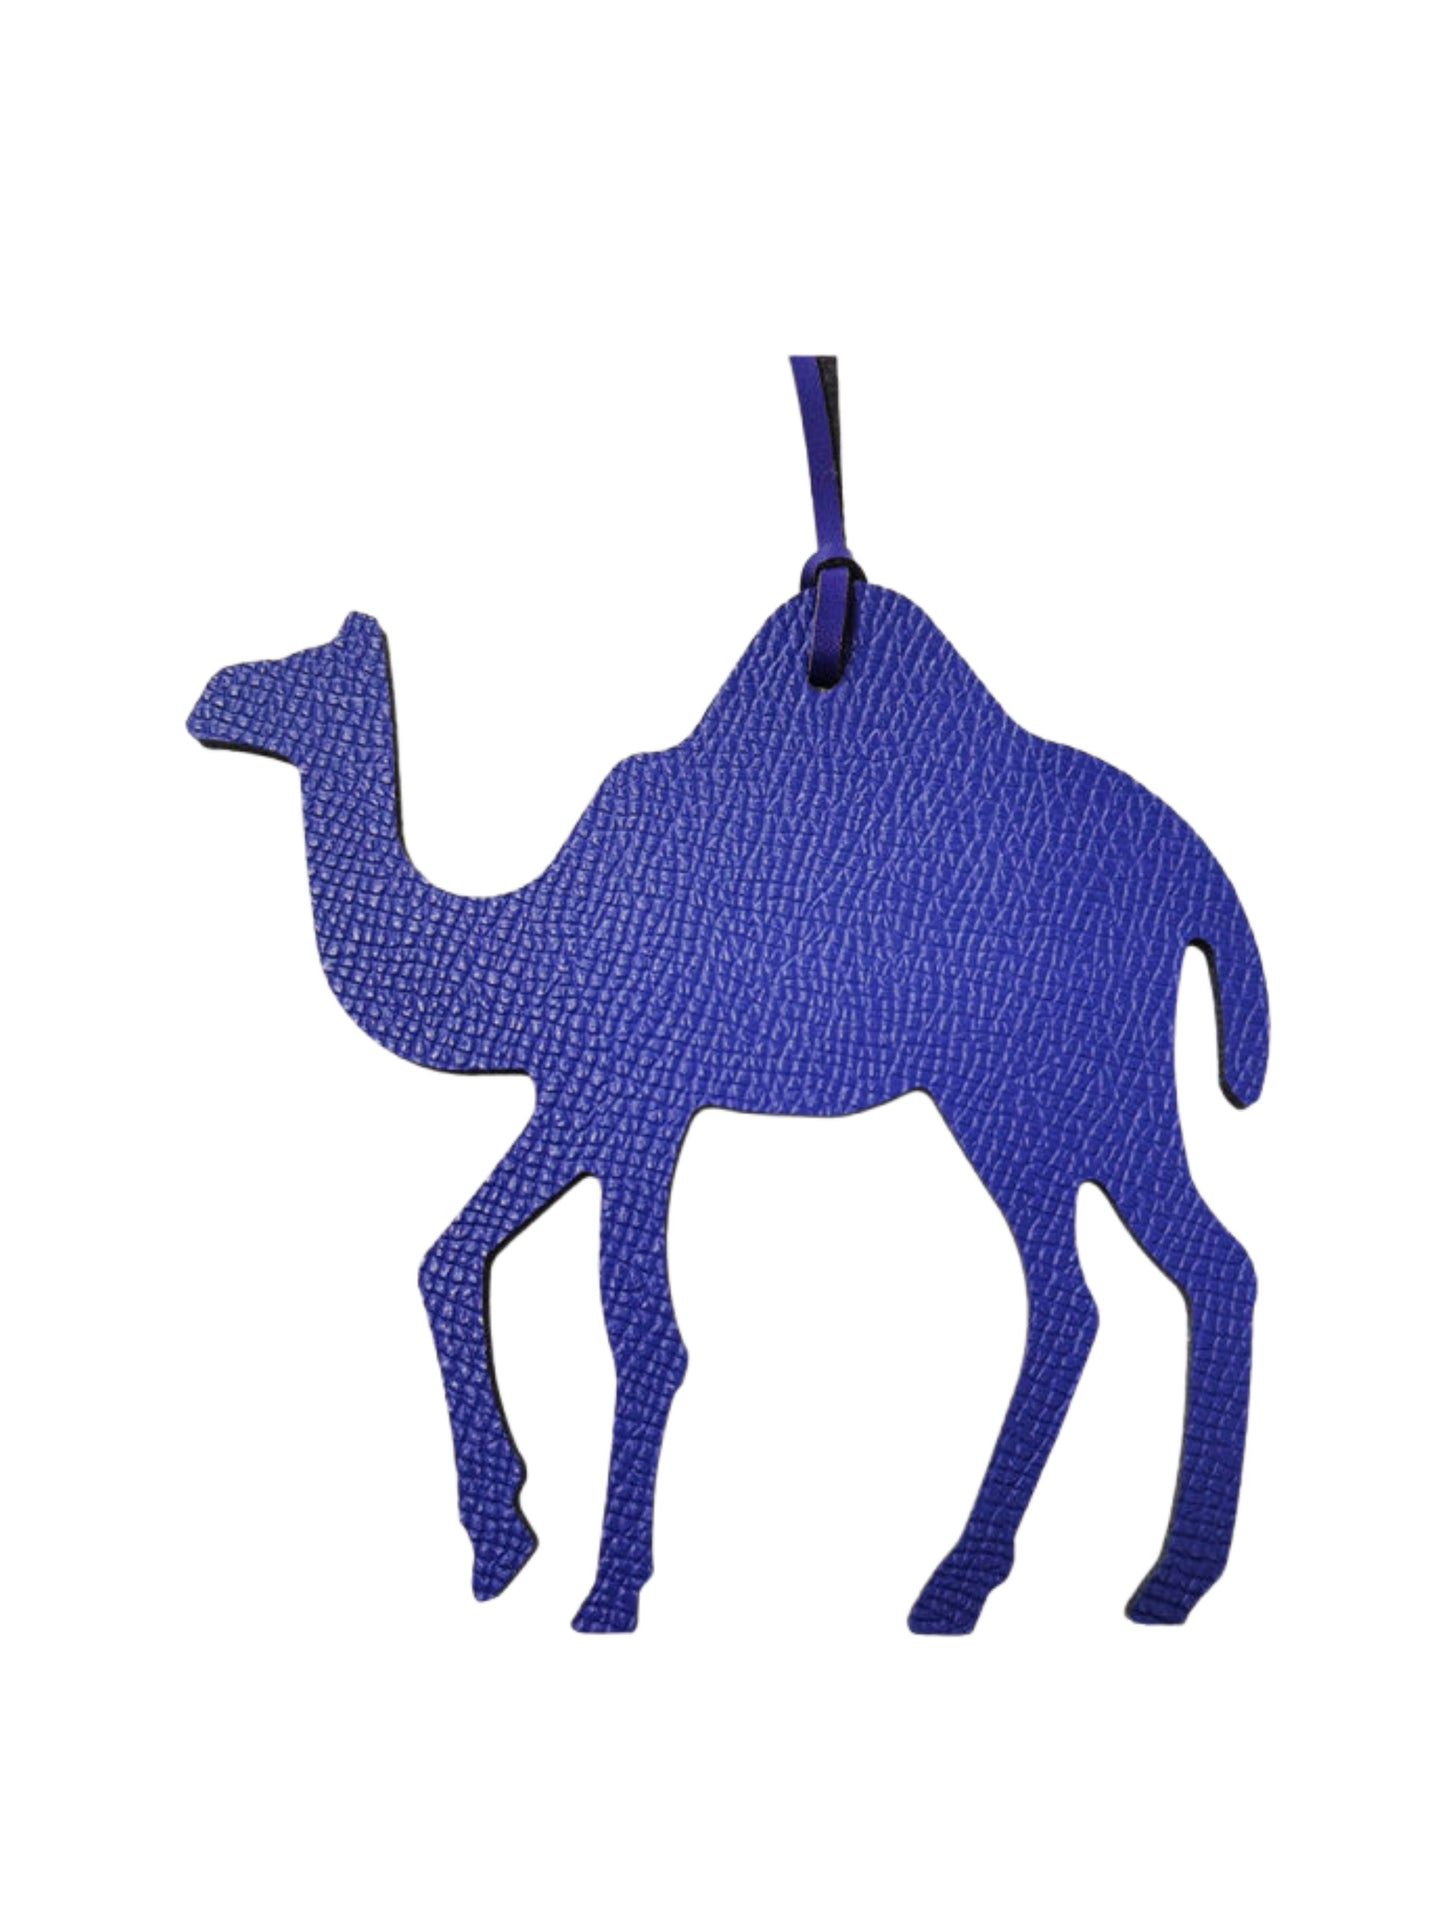 Leather Camel Bag Accessory NAVY